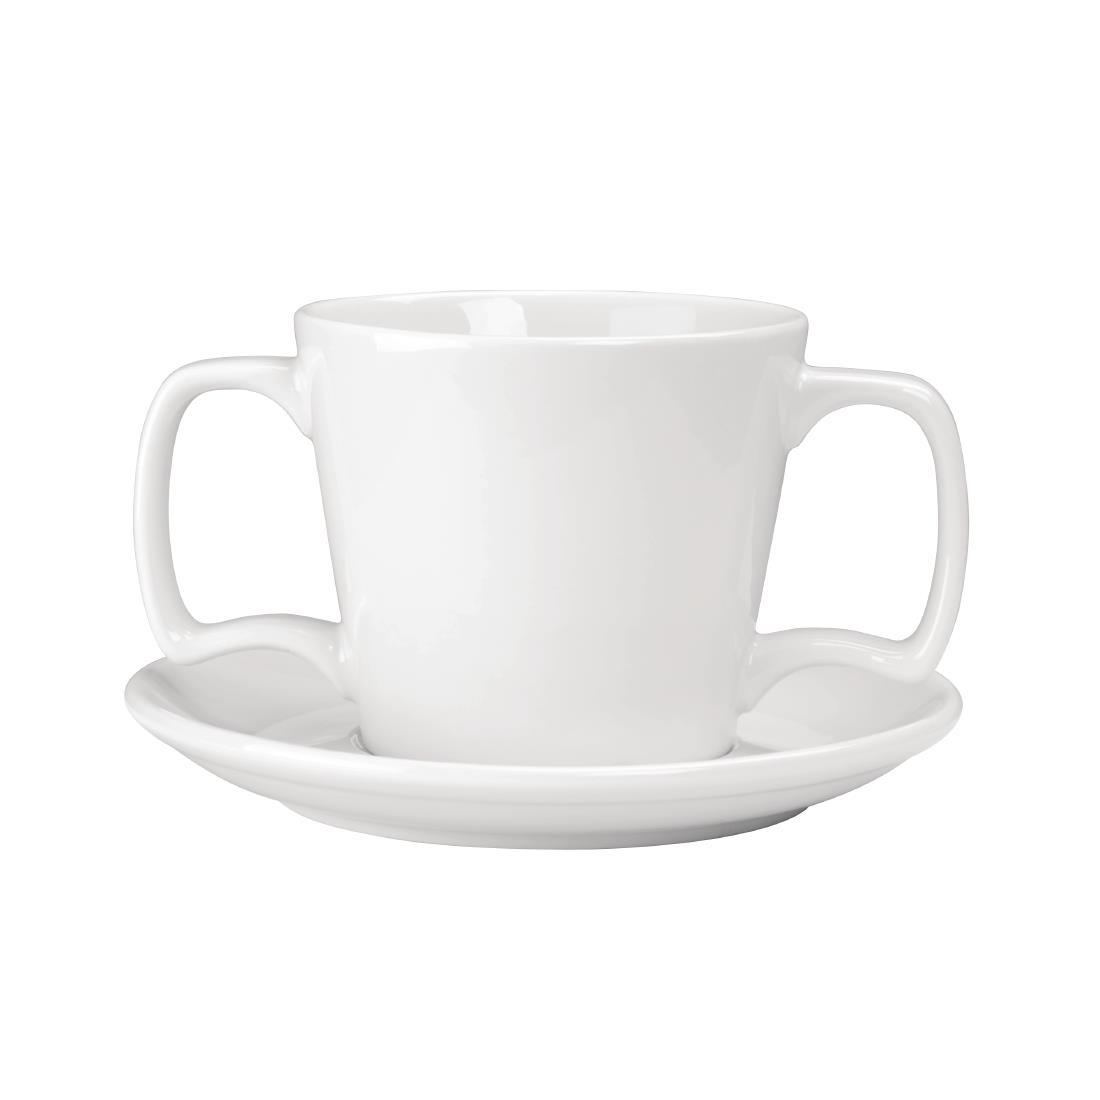 Olympia Heritage Double Handle Mugs 300ml White (Pack of 6) - DW155  - 4